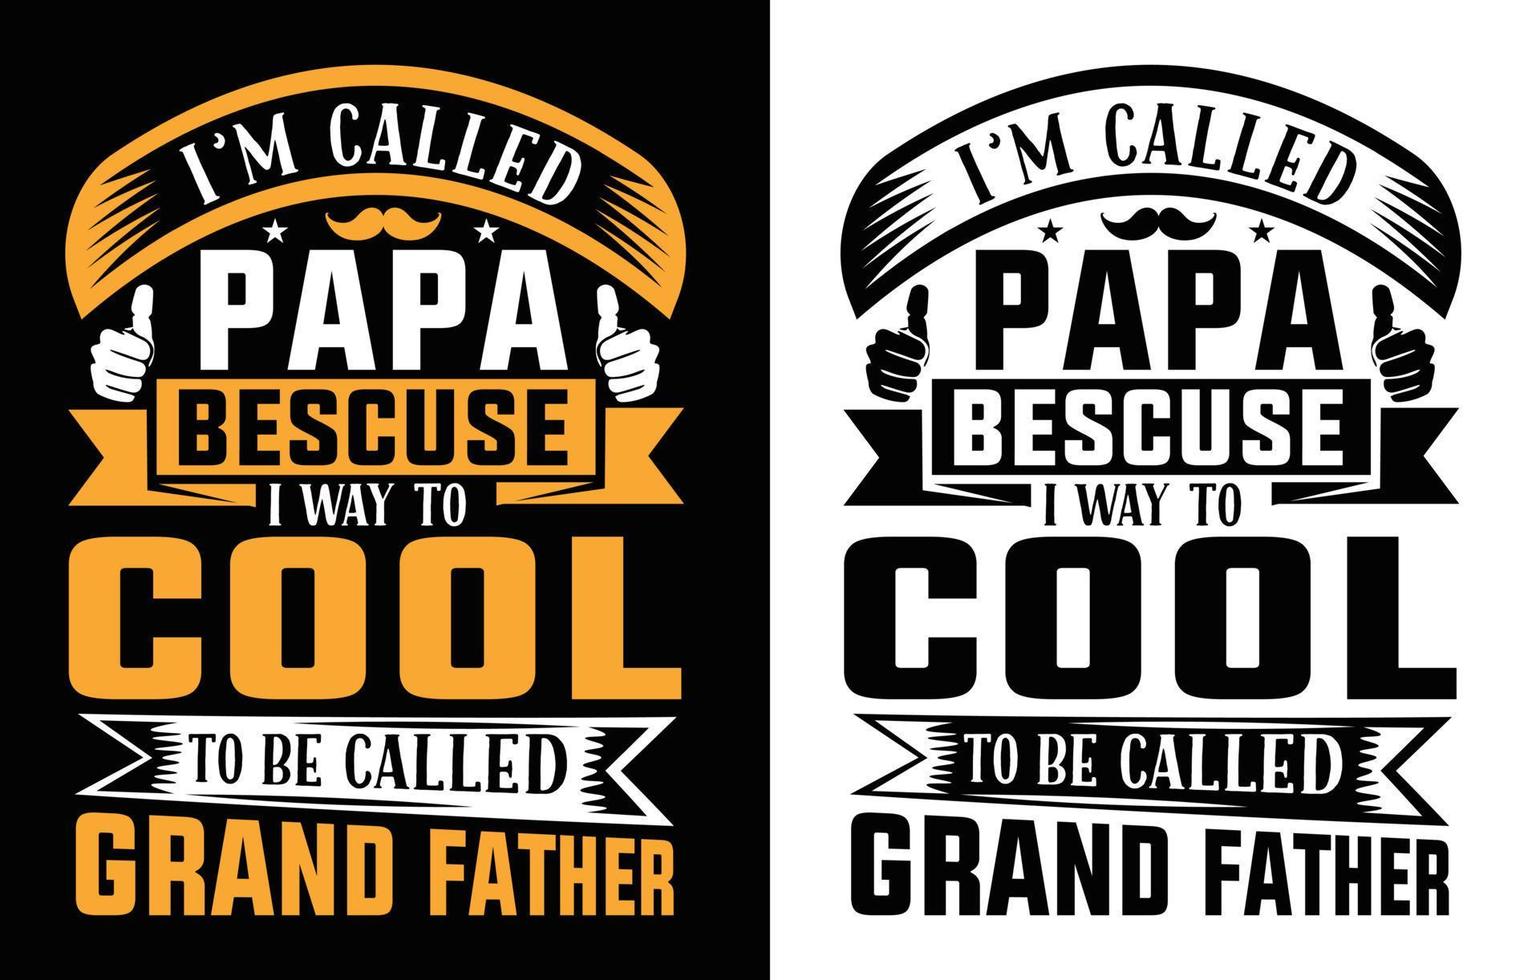 Father's day T shirt design. vector